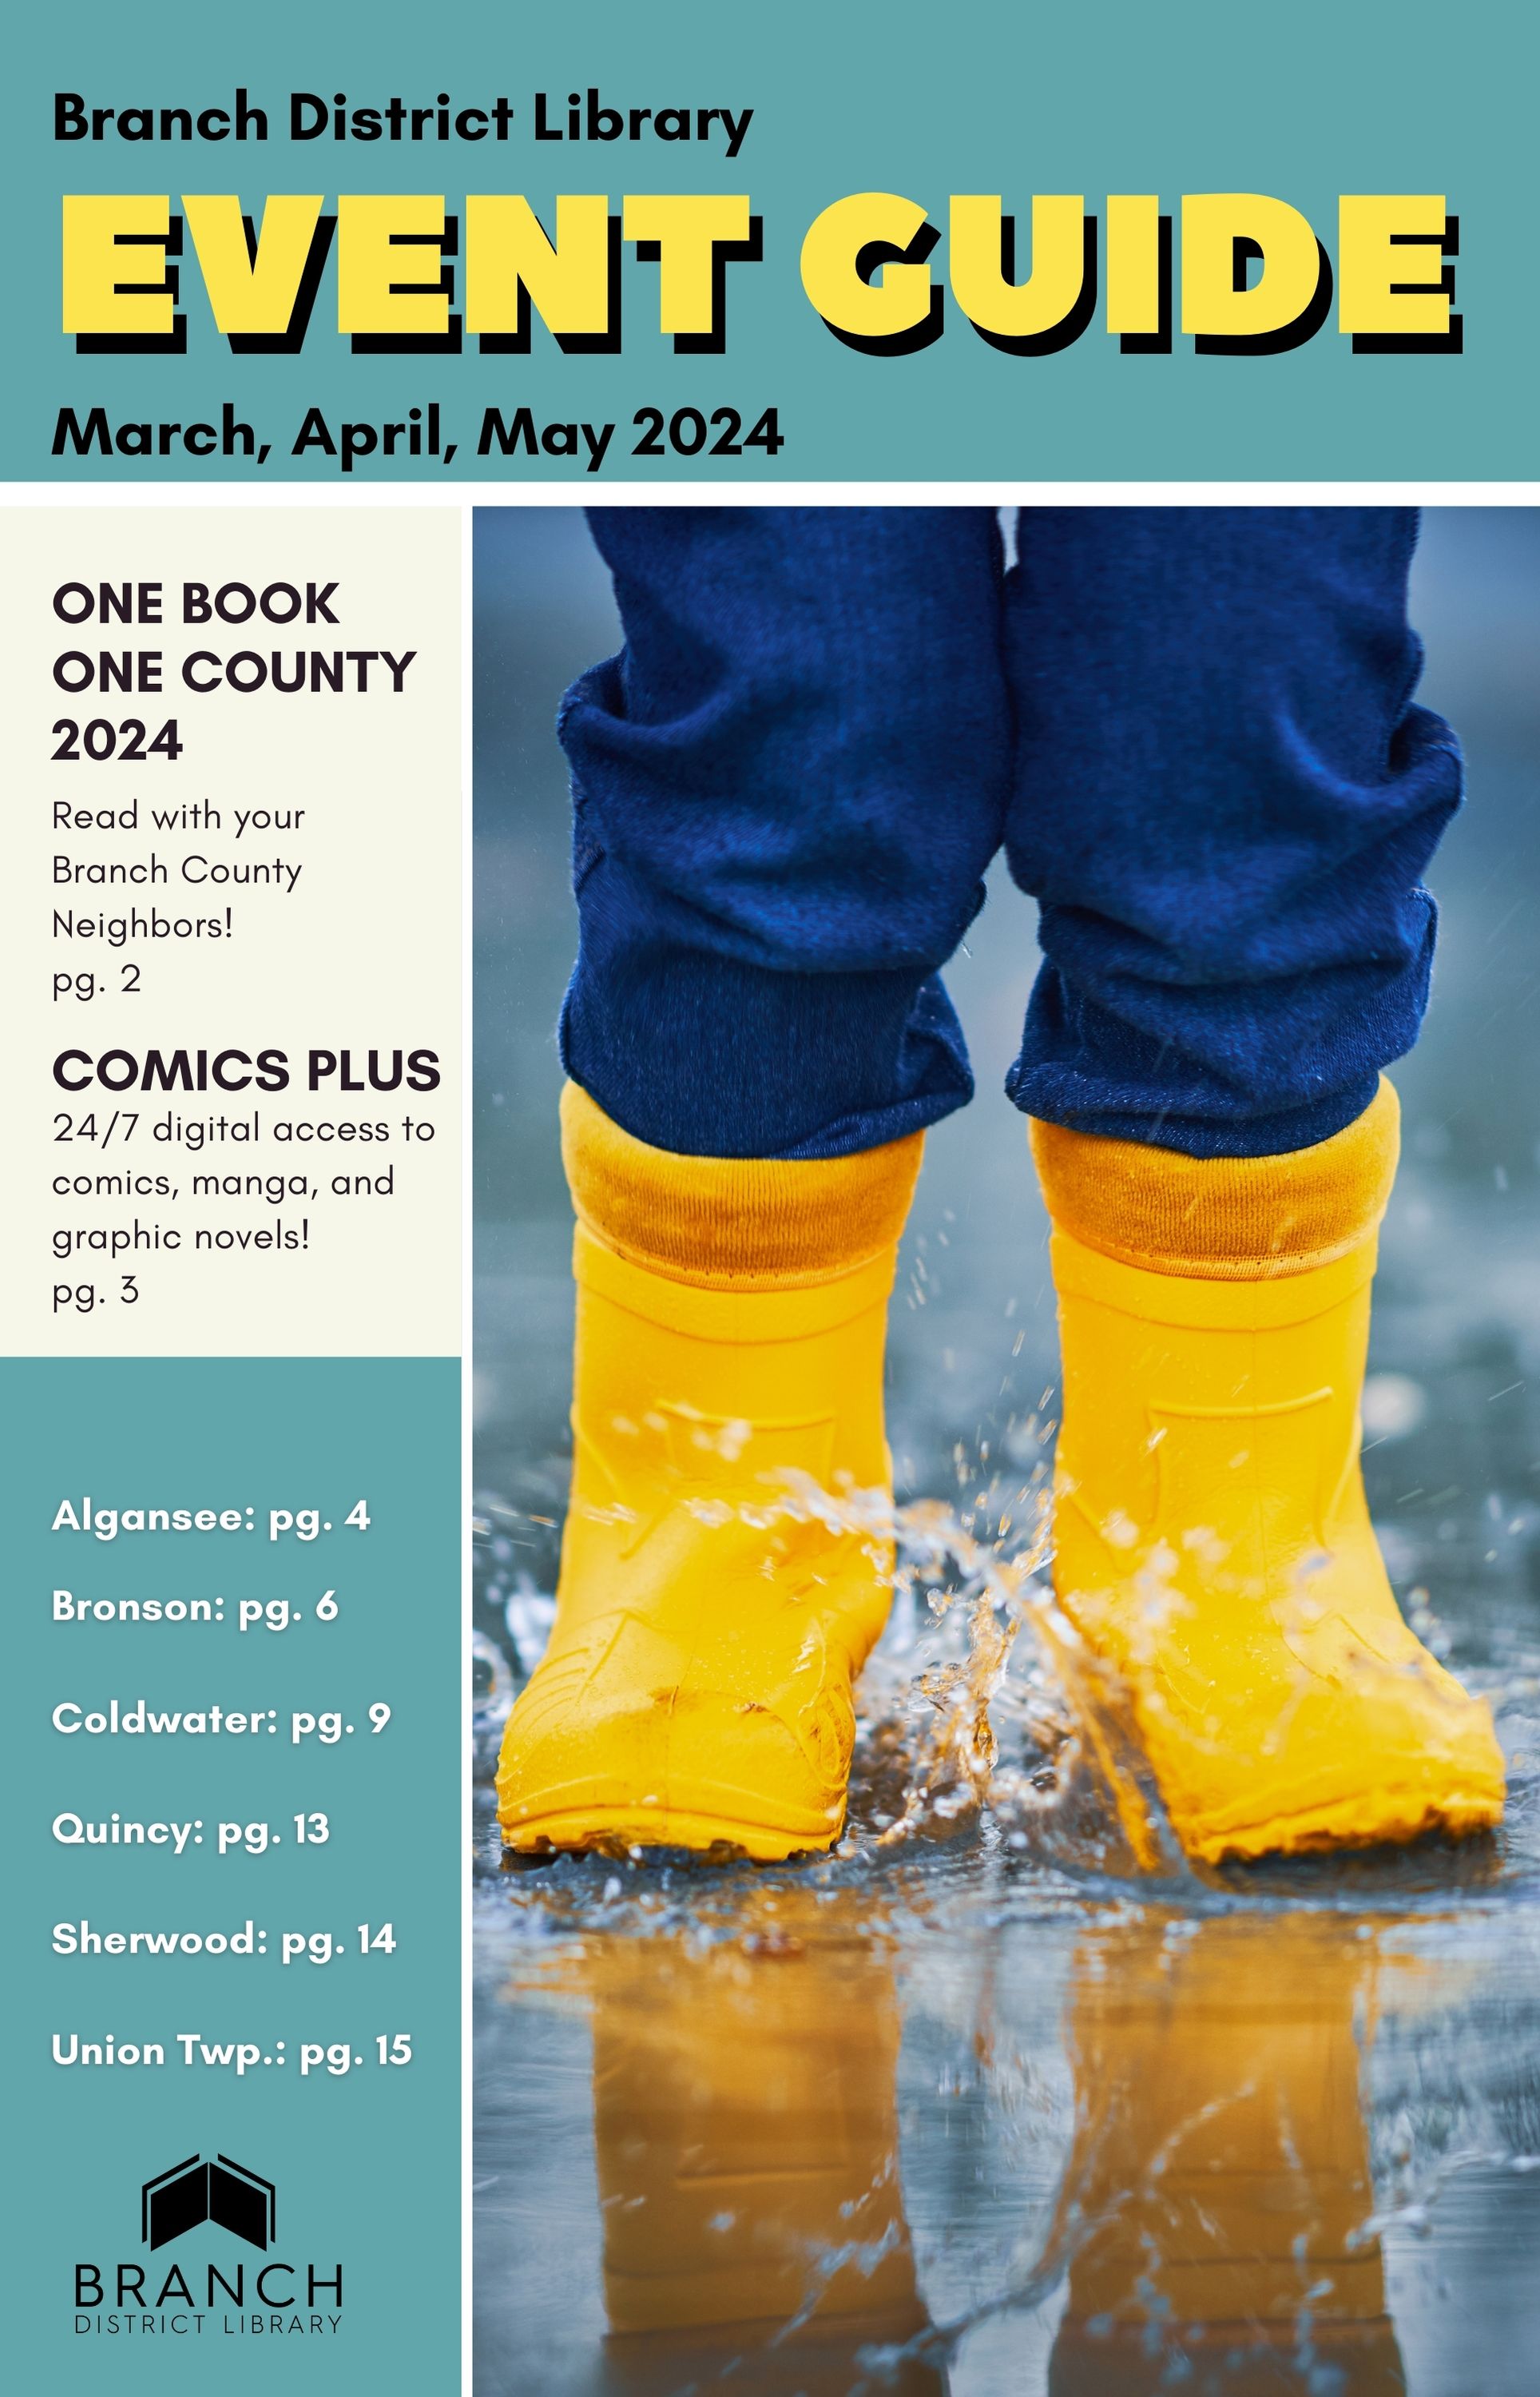 legs wearing jeans and yellow rain books splashing in a puddle.